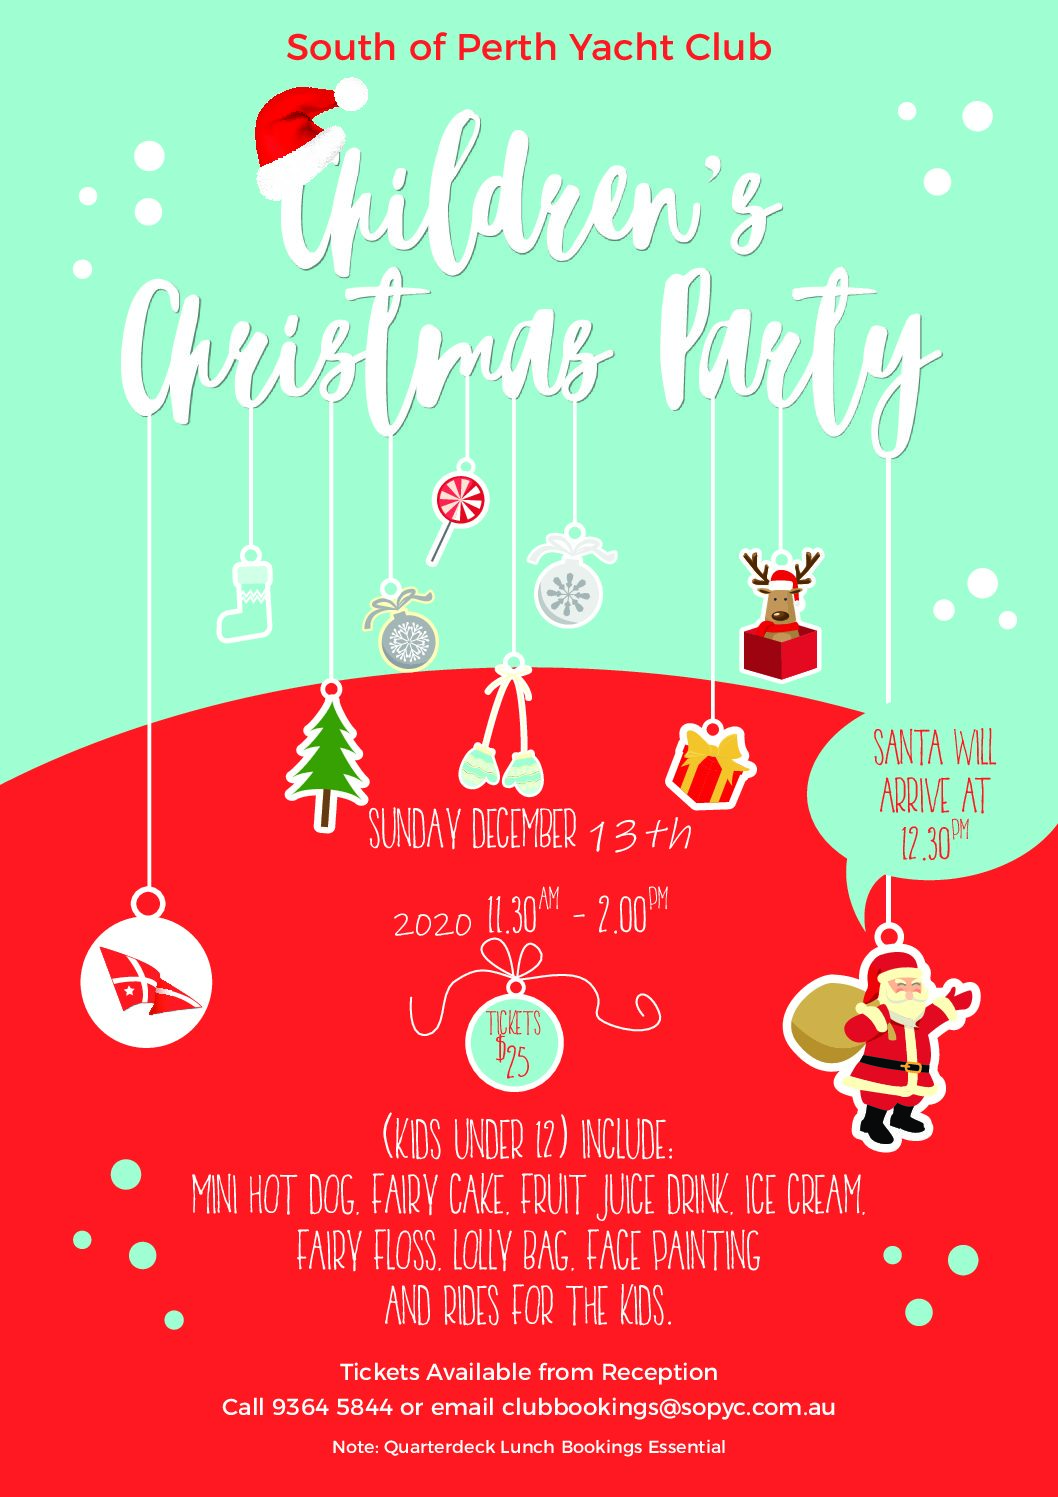 Children's Christmas Party at the Club